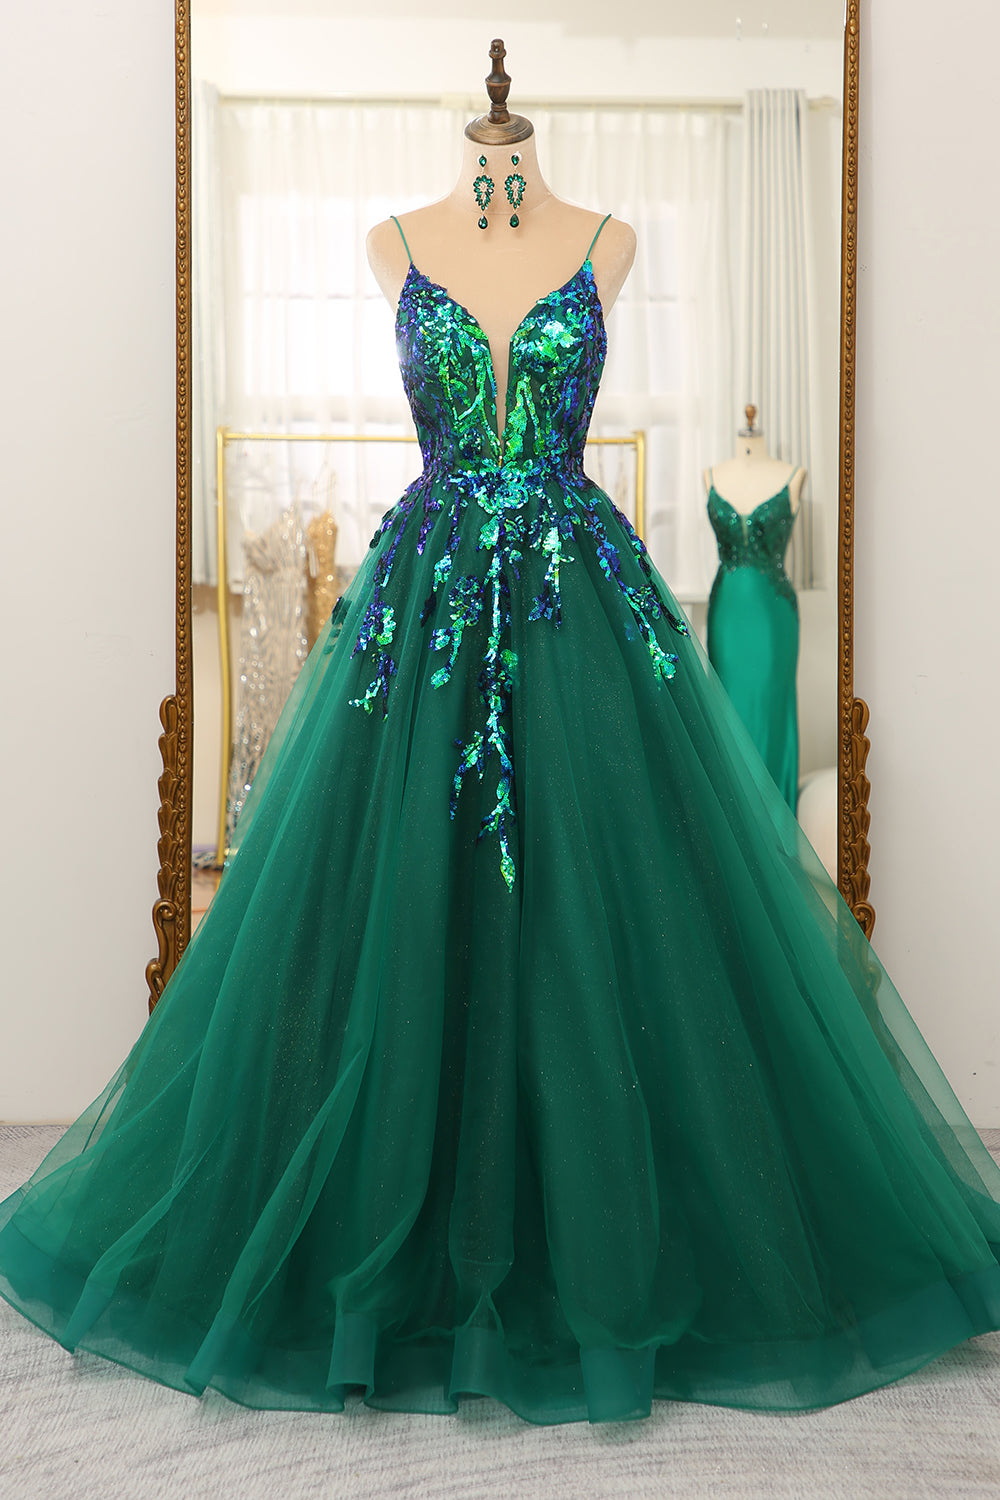 Glitter Dark Green A-Line Tulle Spaghetti Straps Long Prom Dress With Sequin